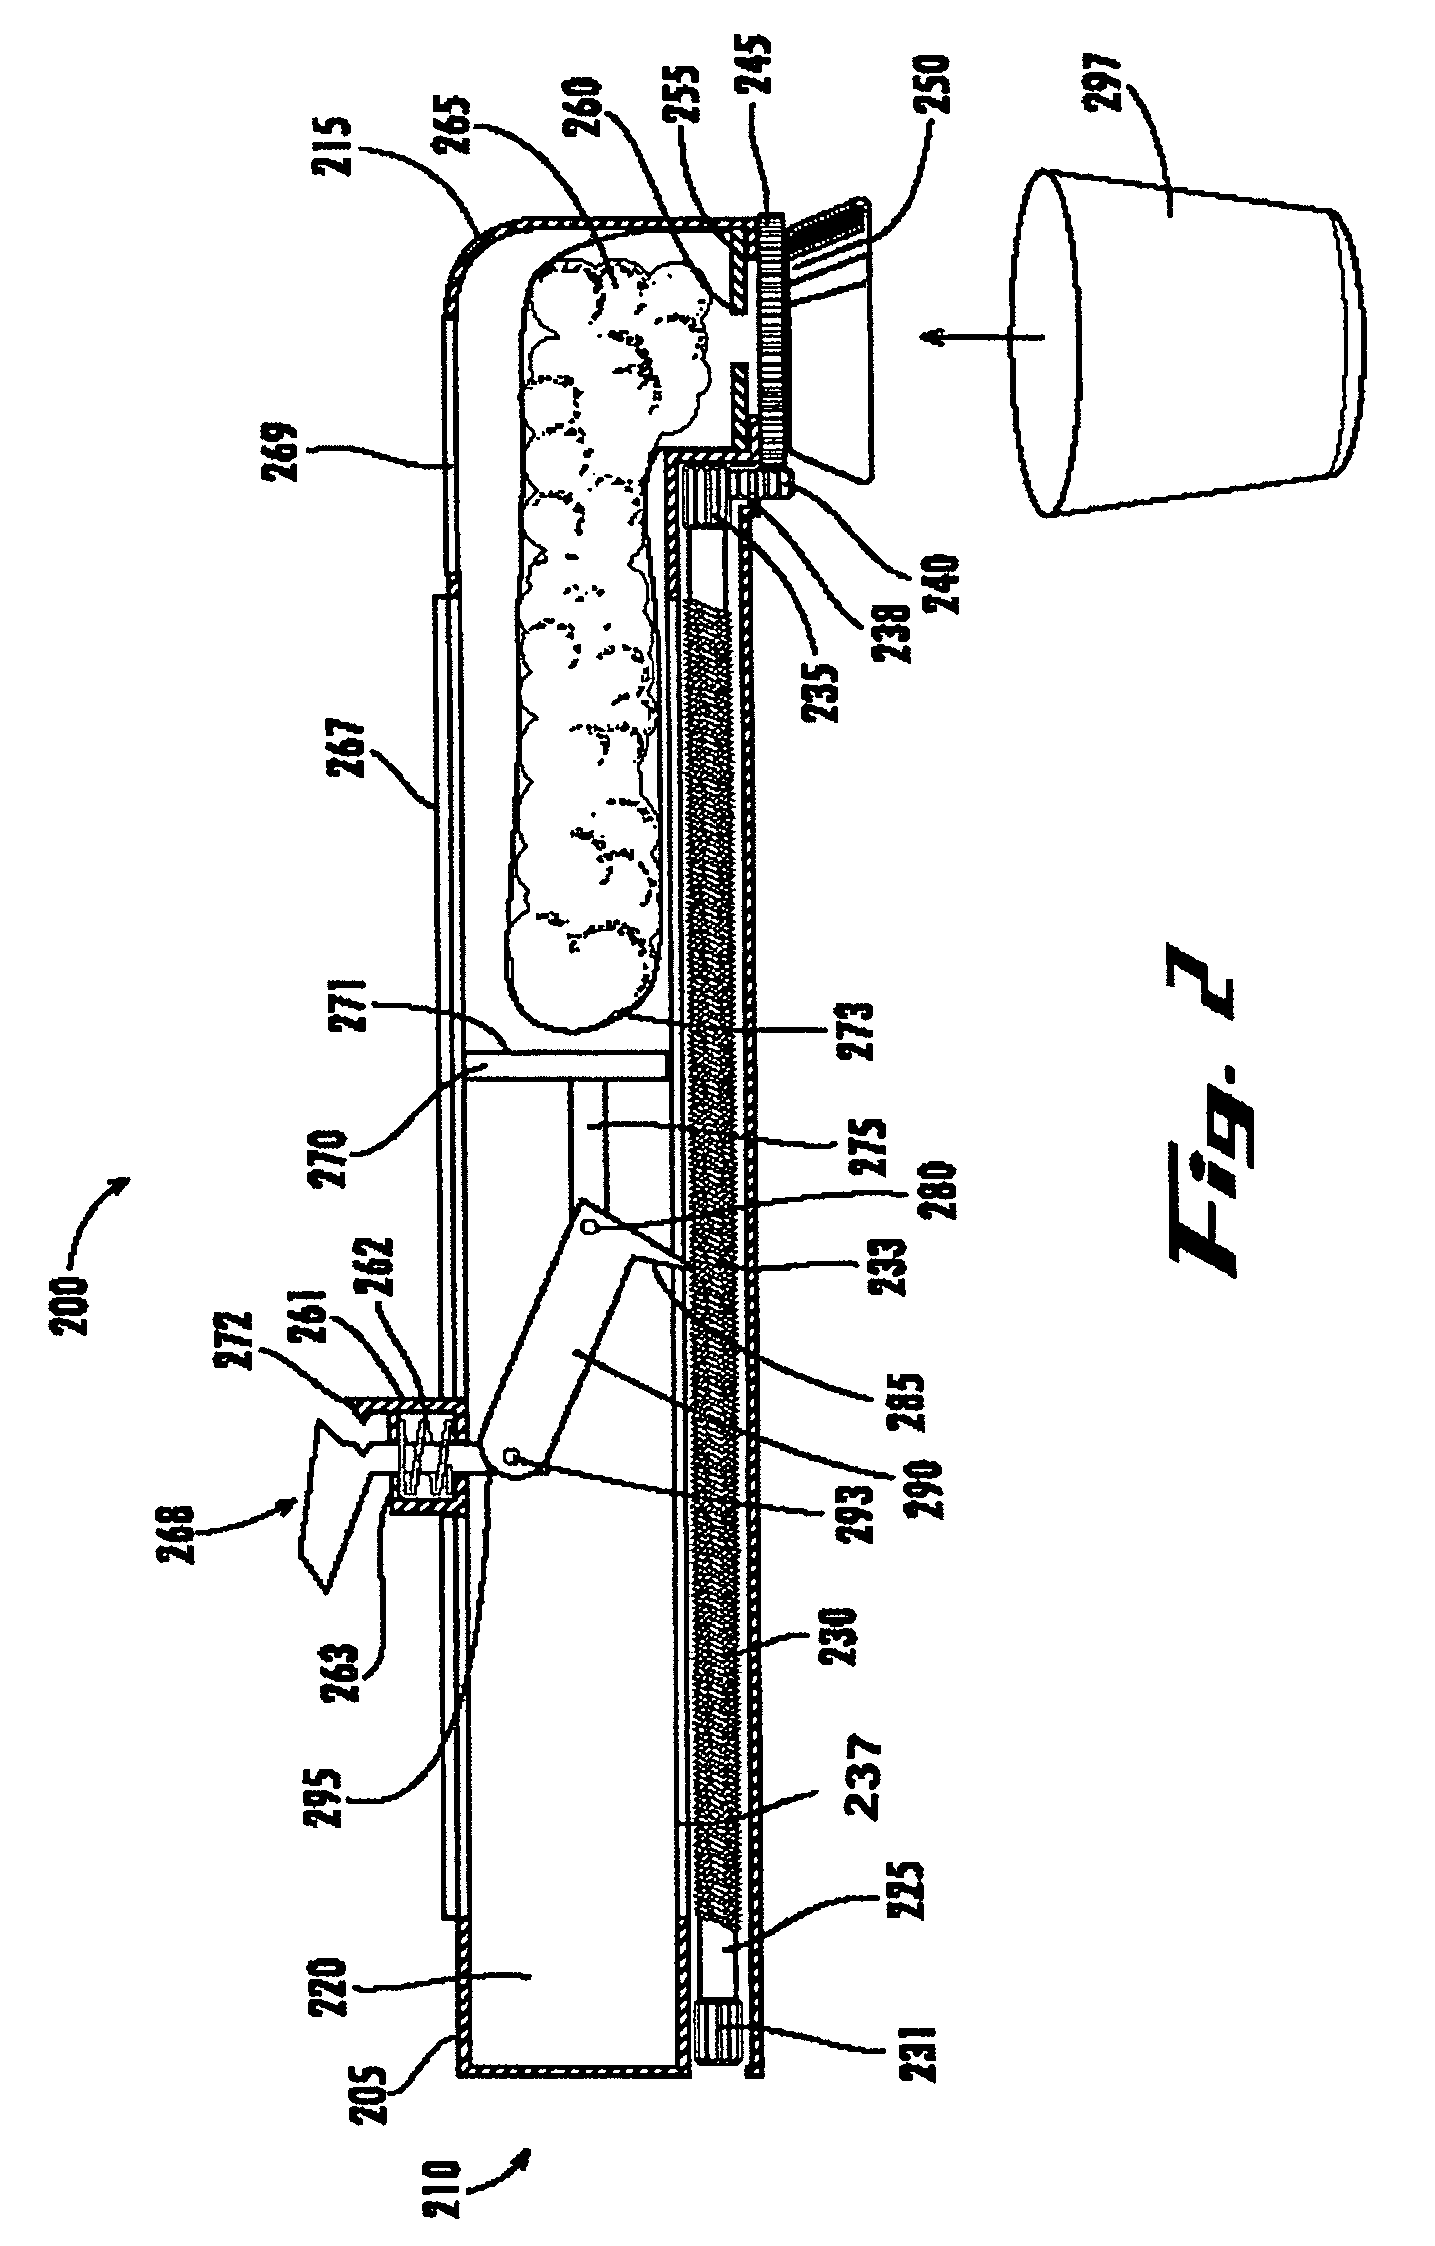 Self-contained dental prophylaxis angle with offset rotational axis